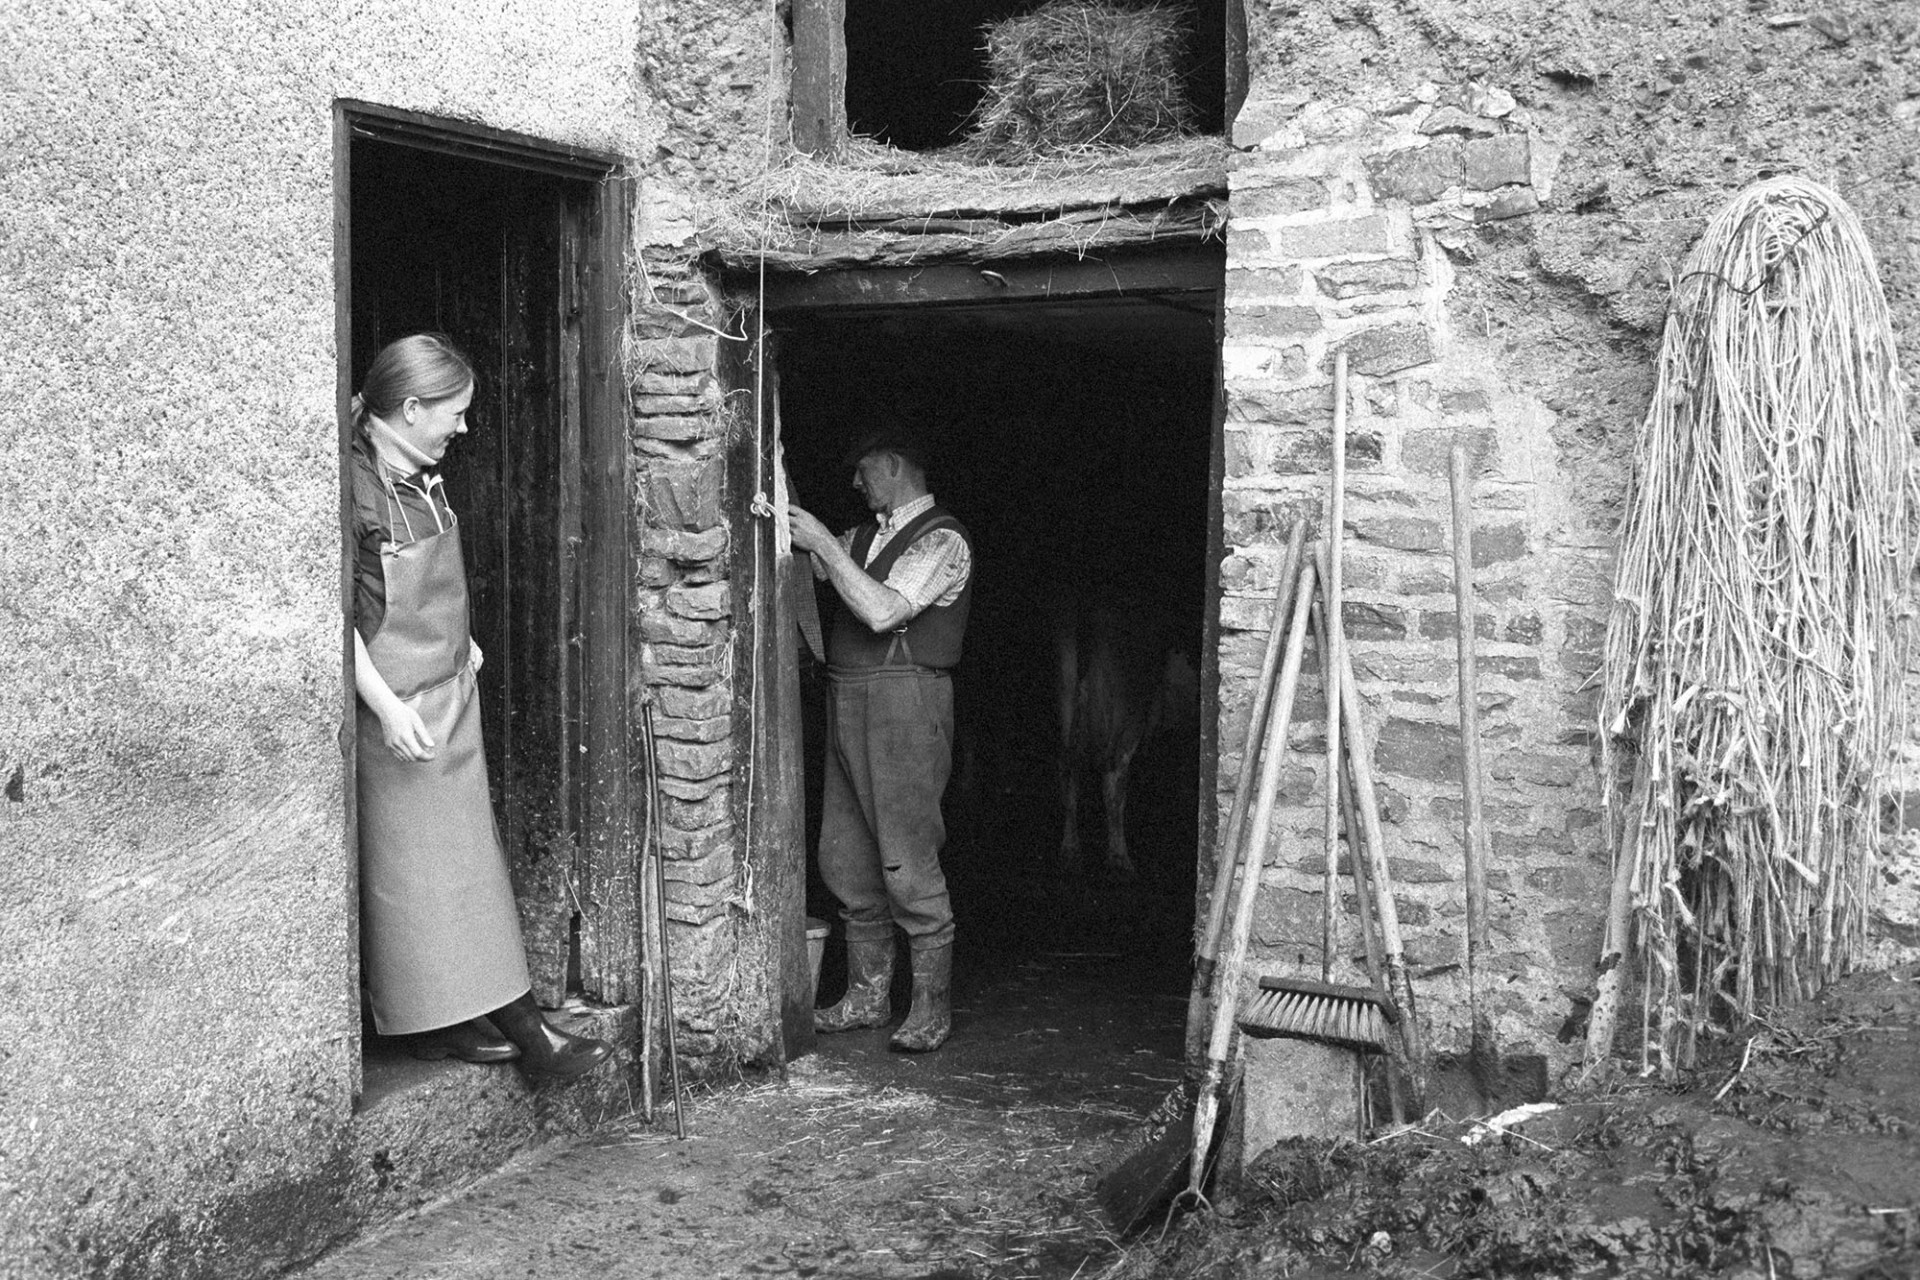 Farmer and daughter at barn door before milking.
[John Woolacott working in a barn and talking to his daughter who is leaning in a doorway. Farm tools are lent against the barn wall next to ropes hanging up. A hay bale can be seen in the barn loft.]